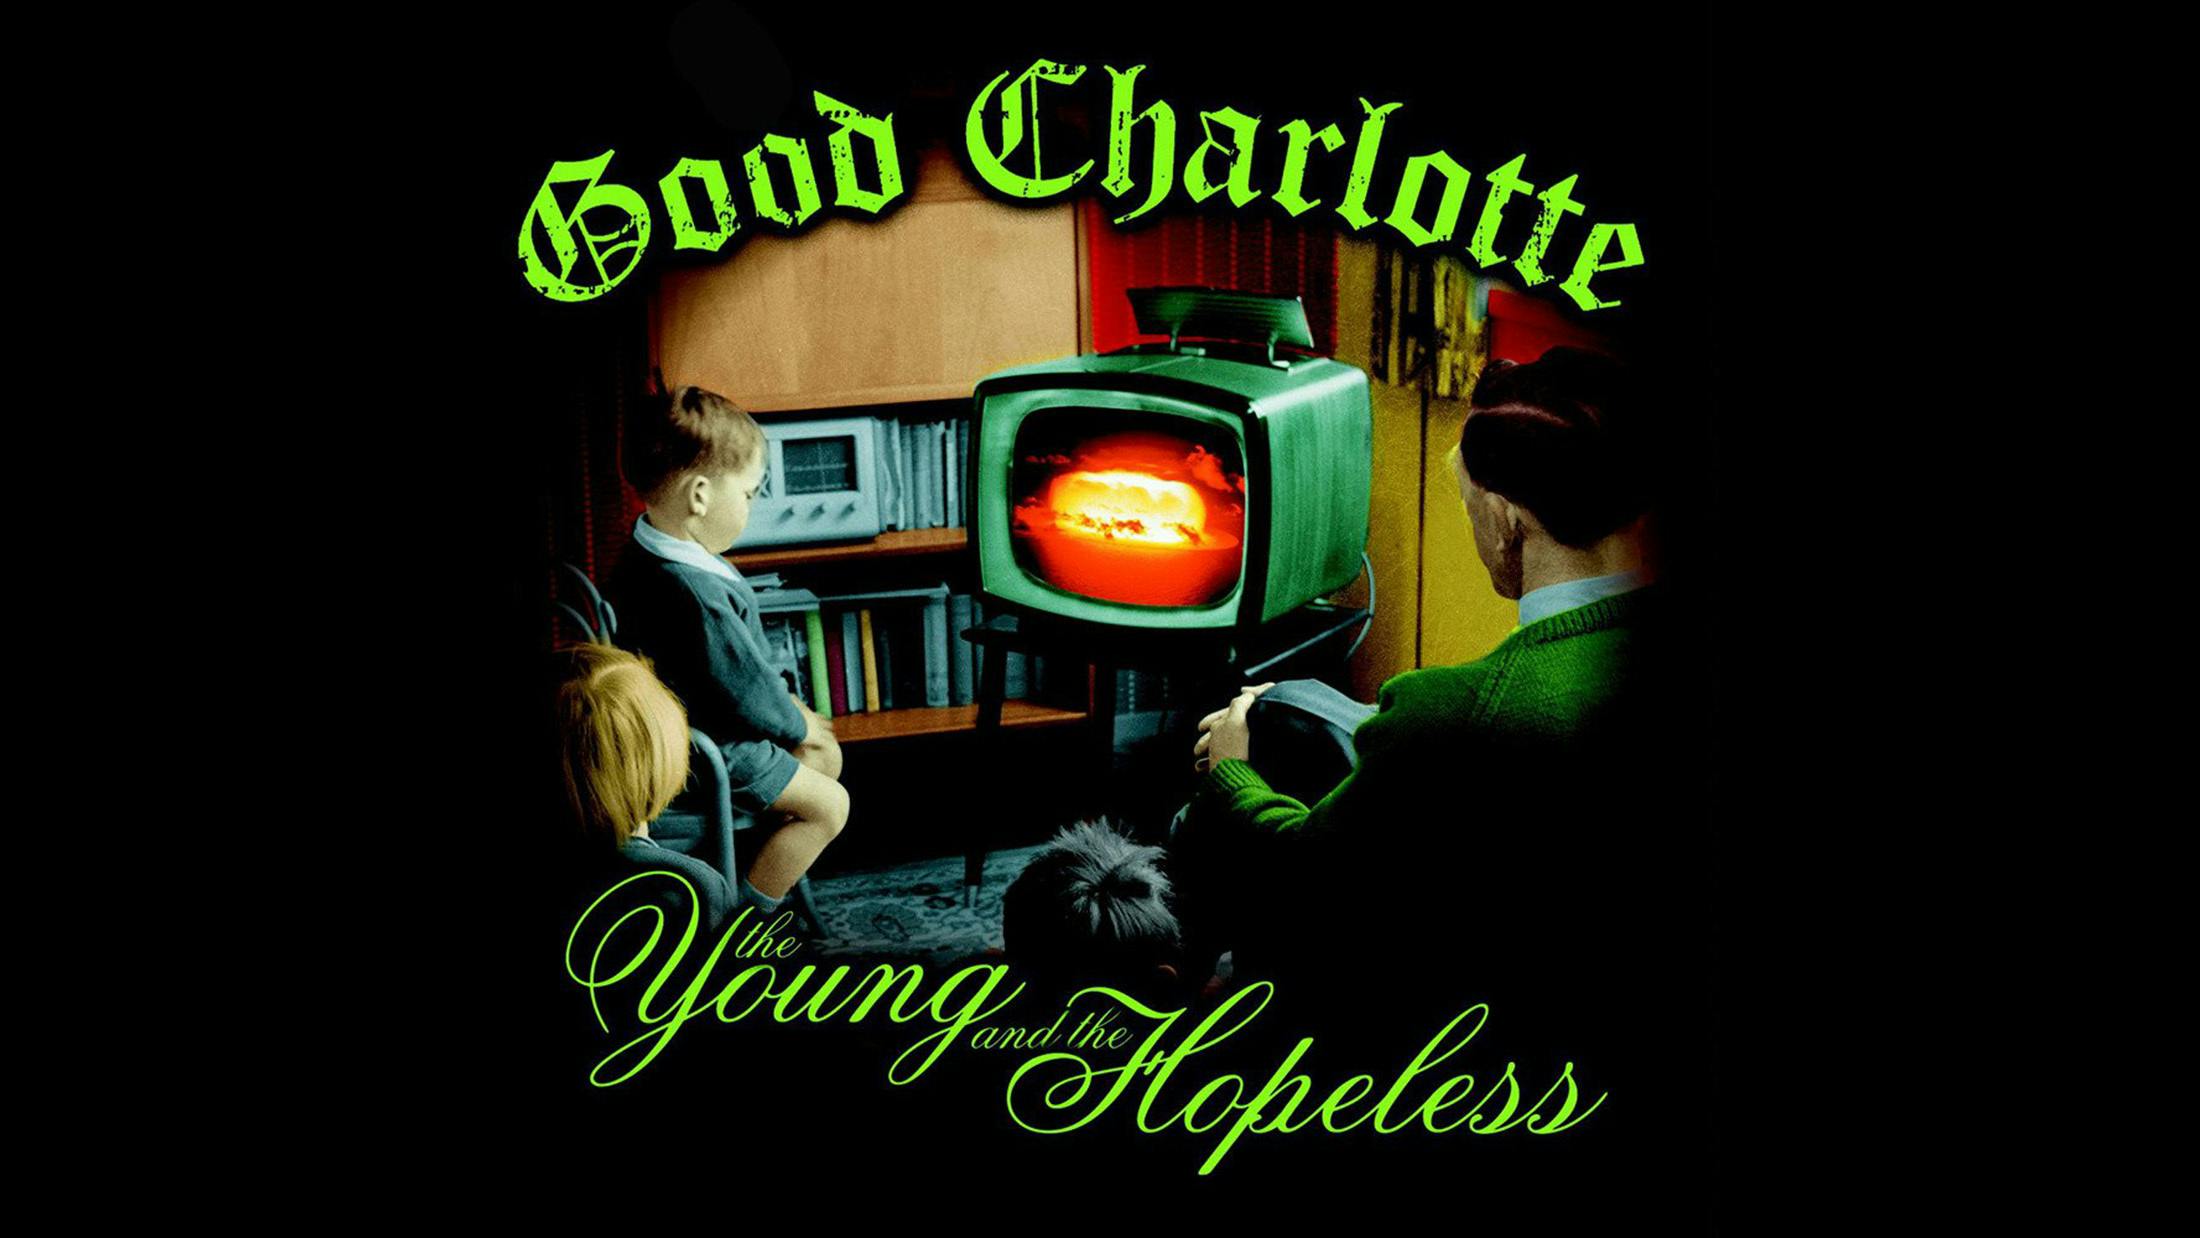 Before Good Charlotte, there had never been a band quite like Good Charlotte – punk rock tailored for young pop fans. The Maryland four-piece turned a whole generation of kids into Liberty-spiked, eyeliner-wearing rock fanatics. The Anthem was, quite literally, an anthem for The Young And The Hopeless, telling them to Hold On. No pun intended.